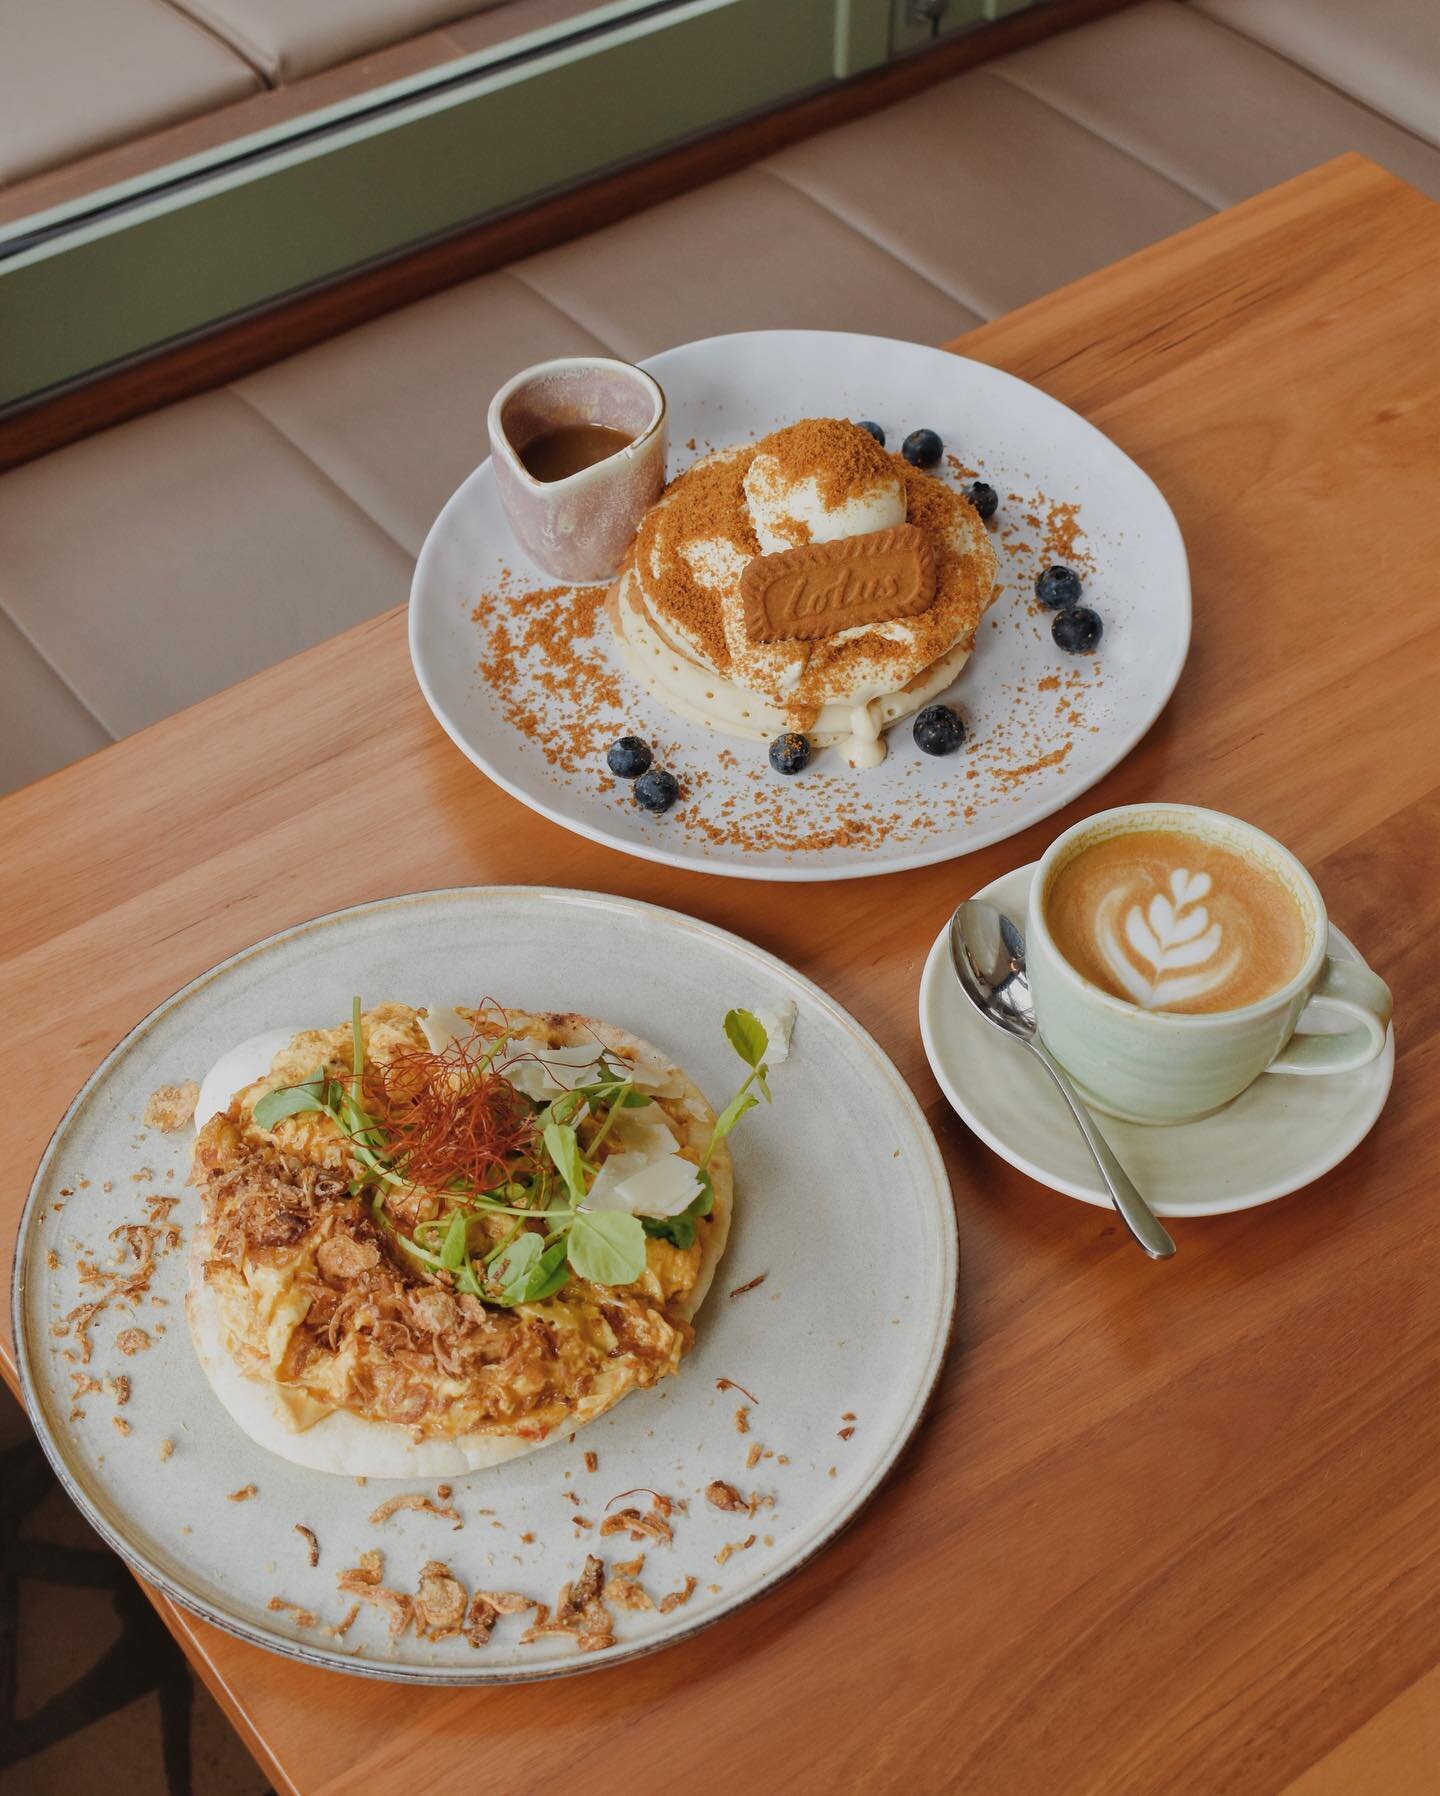 JUST DROPPED:

A brand new travel guide to some of Brisbane&rsquo;s most stunning cafes; from finding a laid-back oasis in the hustle of the Central Business District, or further afield to buzzing suburbs to see and be seen, I&rsquo;ve gathered a lis